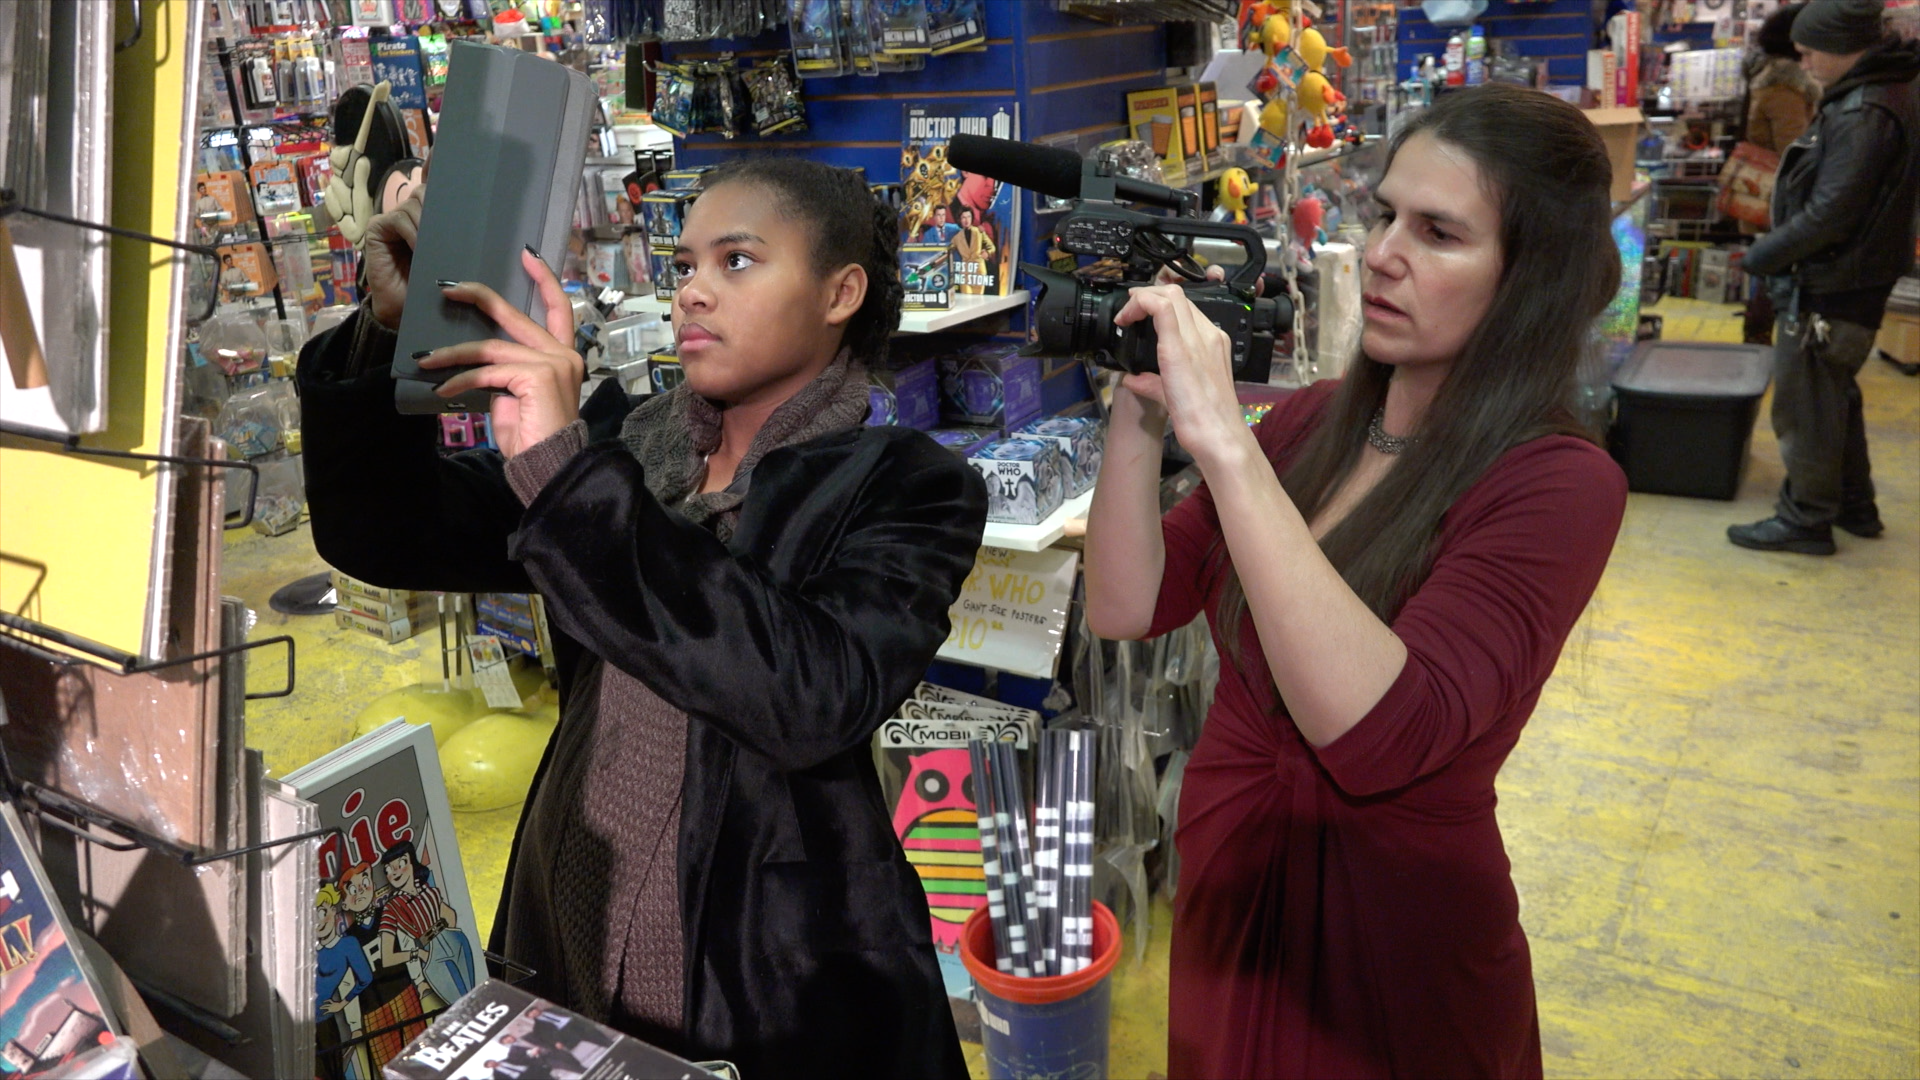 a young women in a comic book shop holds up an Apple ipad. alexander hidalgo is filming the young women with a video camera